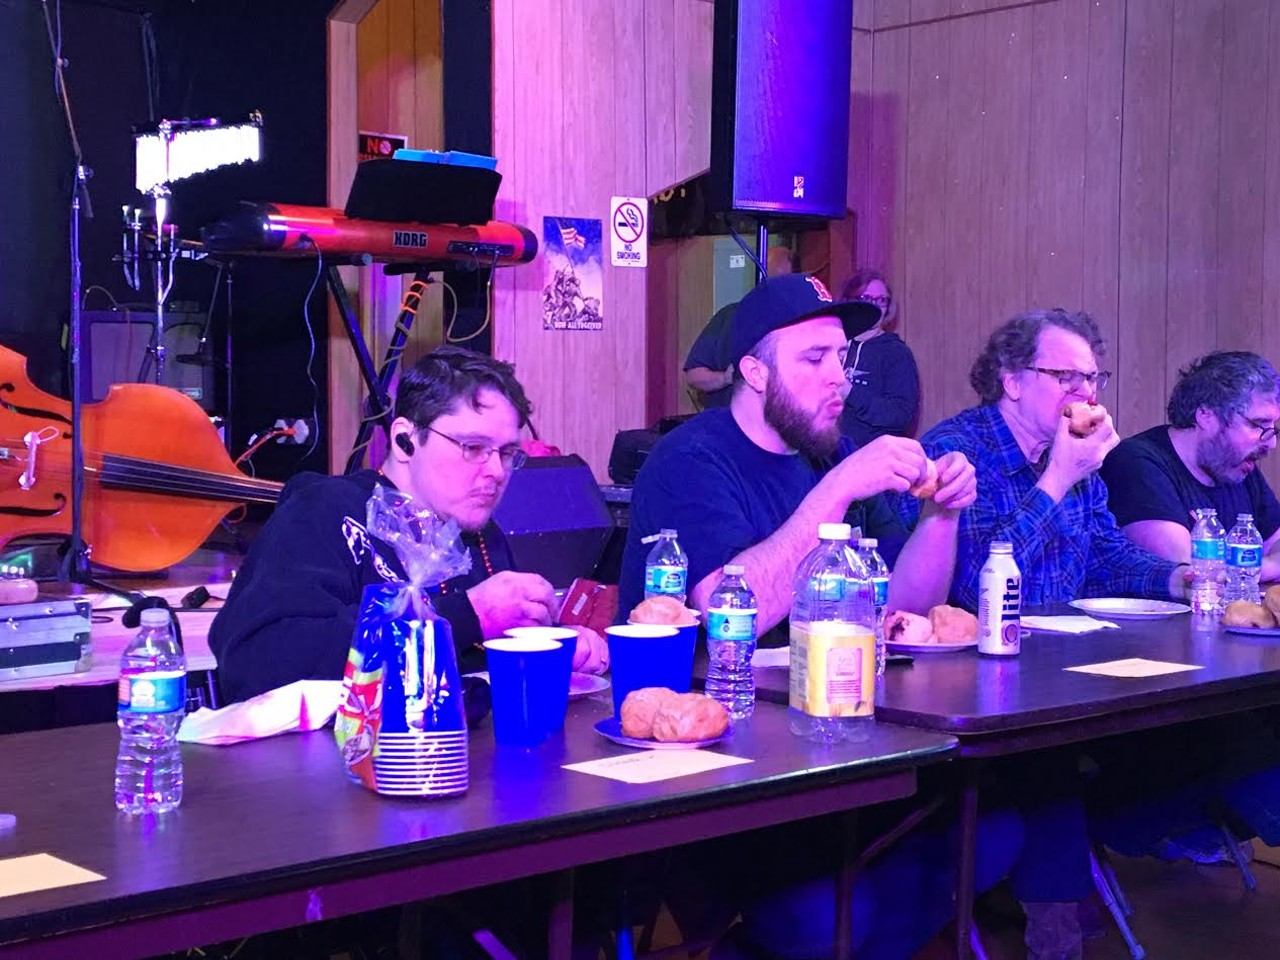 15 gluttonous photos from the paczki eating contest in Hamtramck